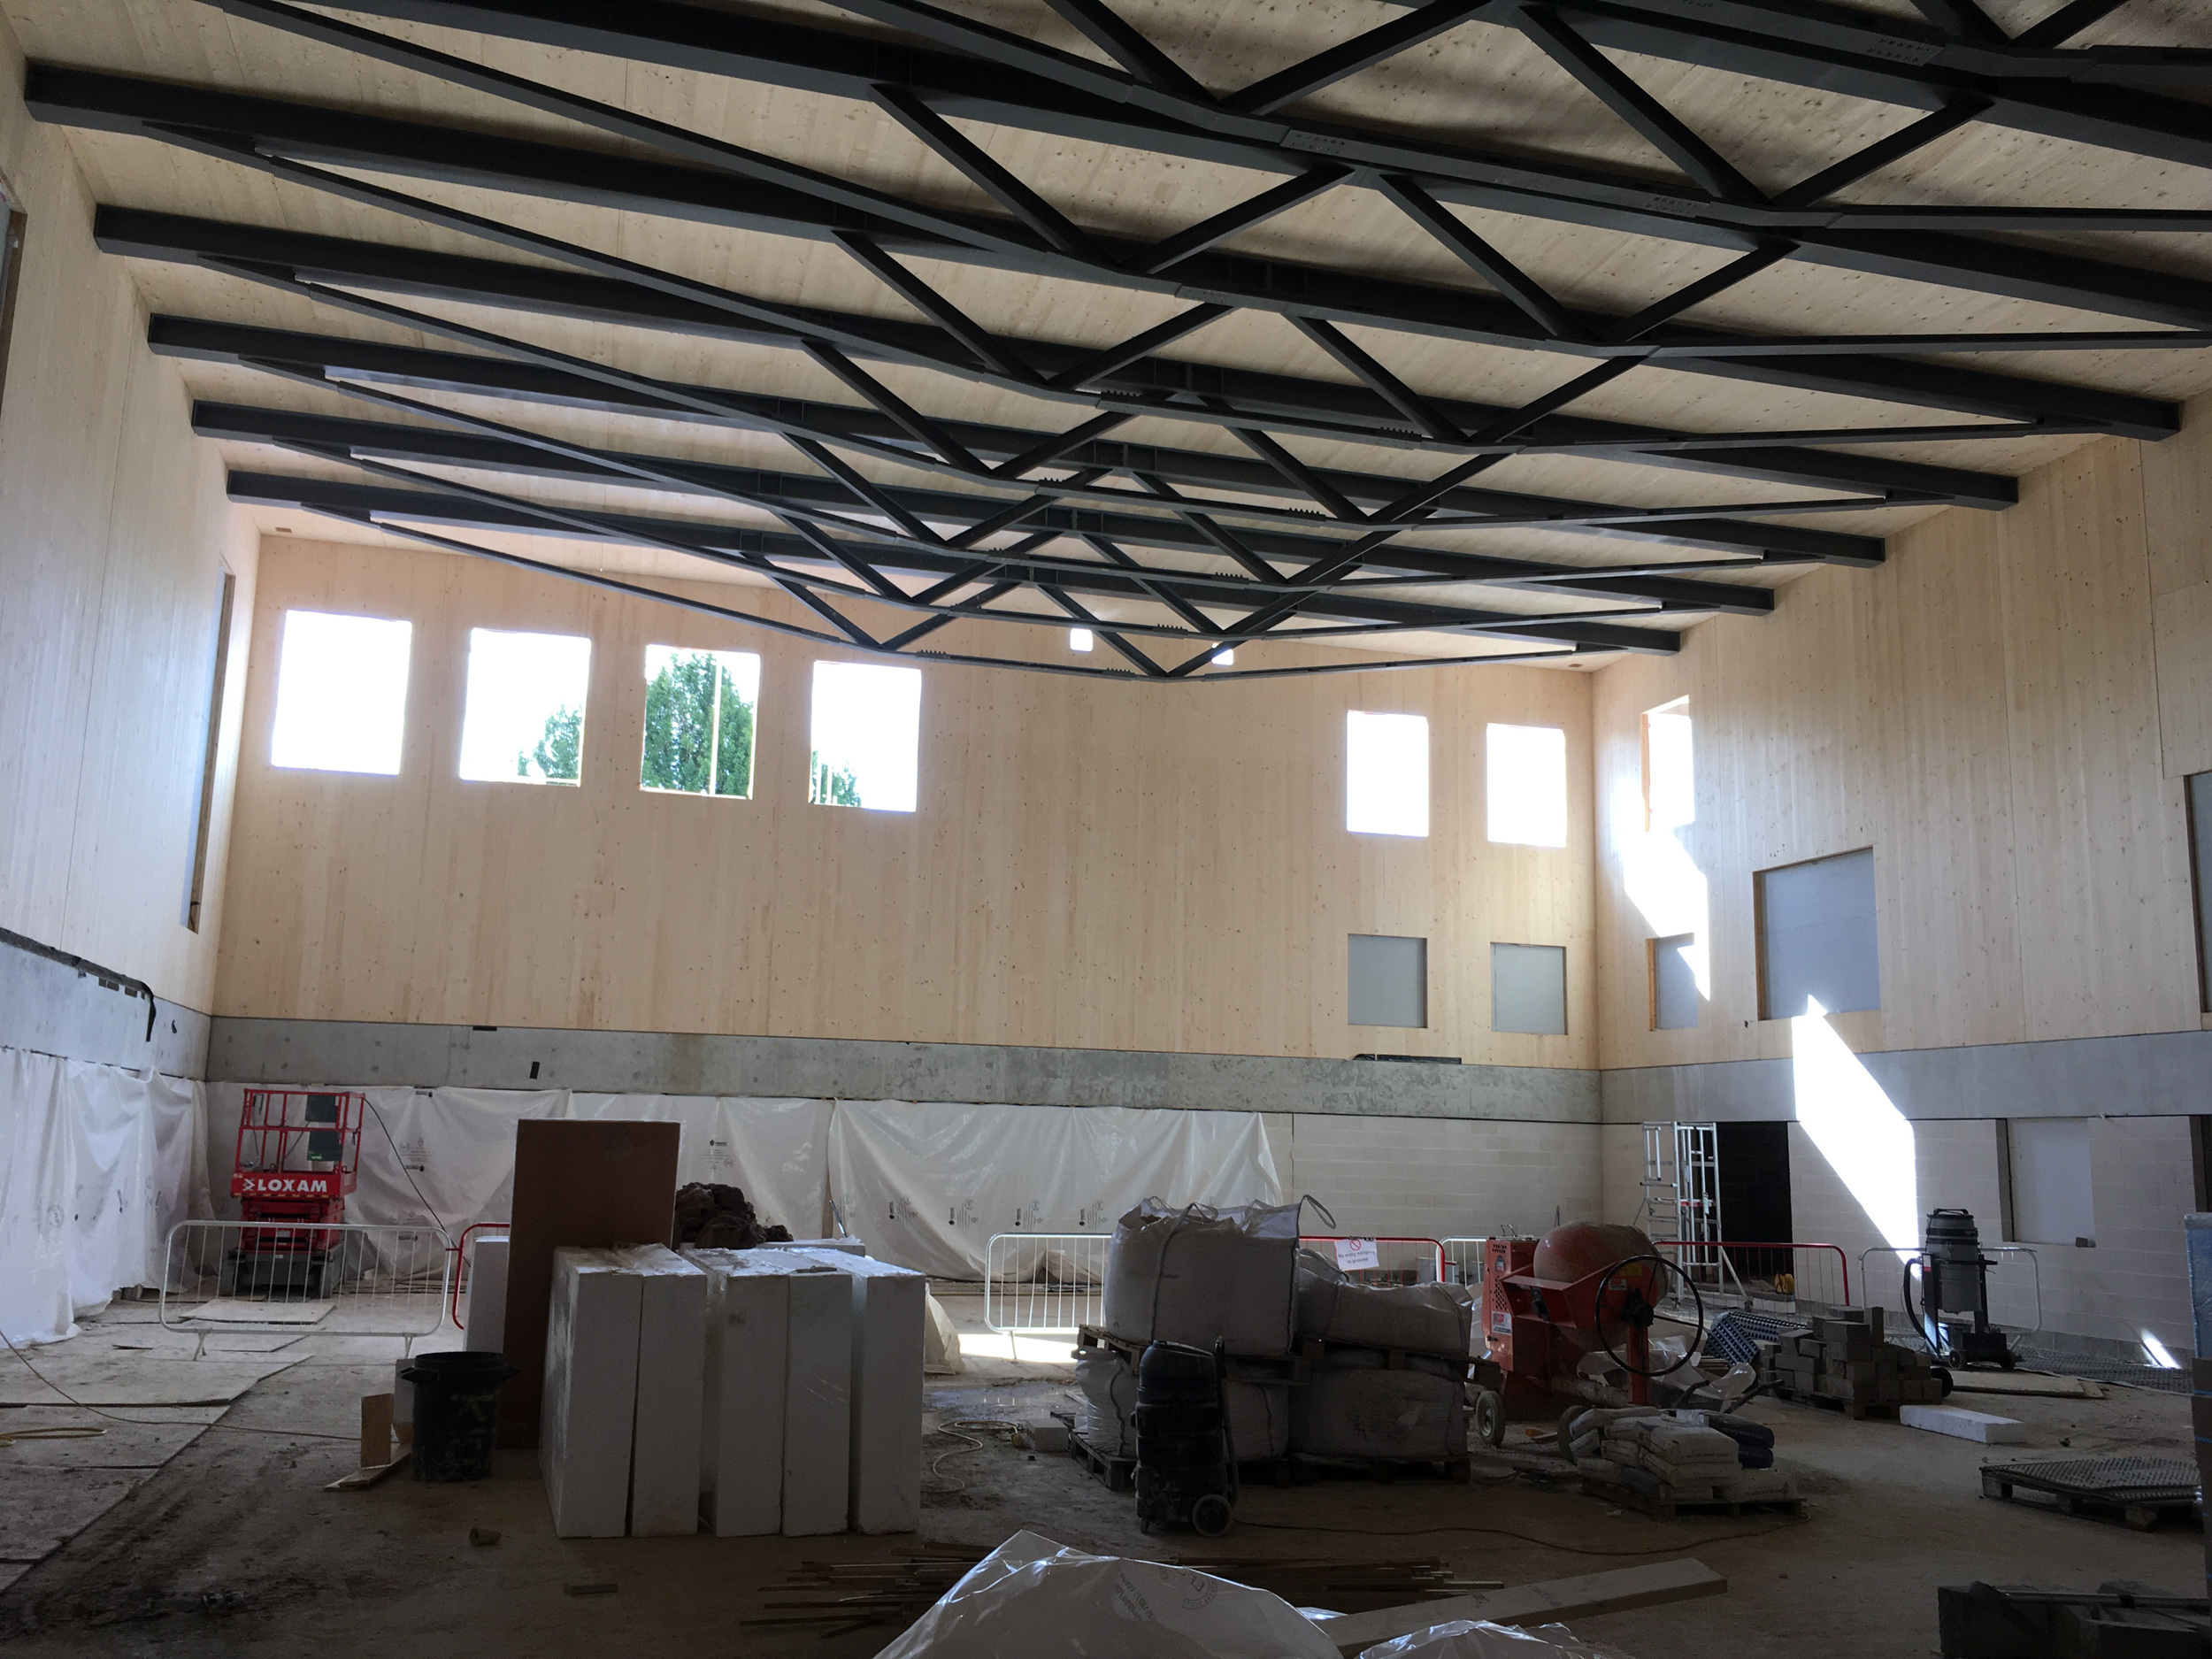 steel trusses in sports hall during construction | CDC Studio Cambridge architects